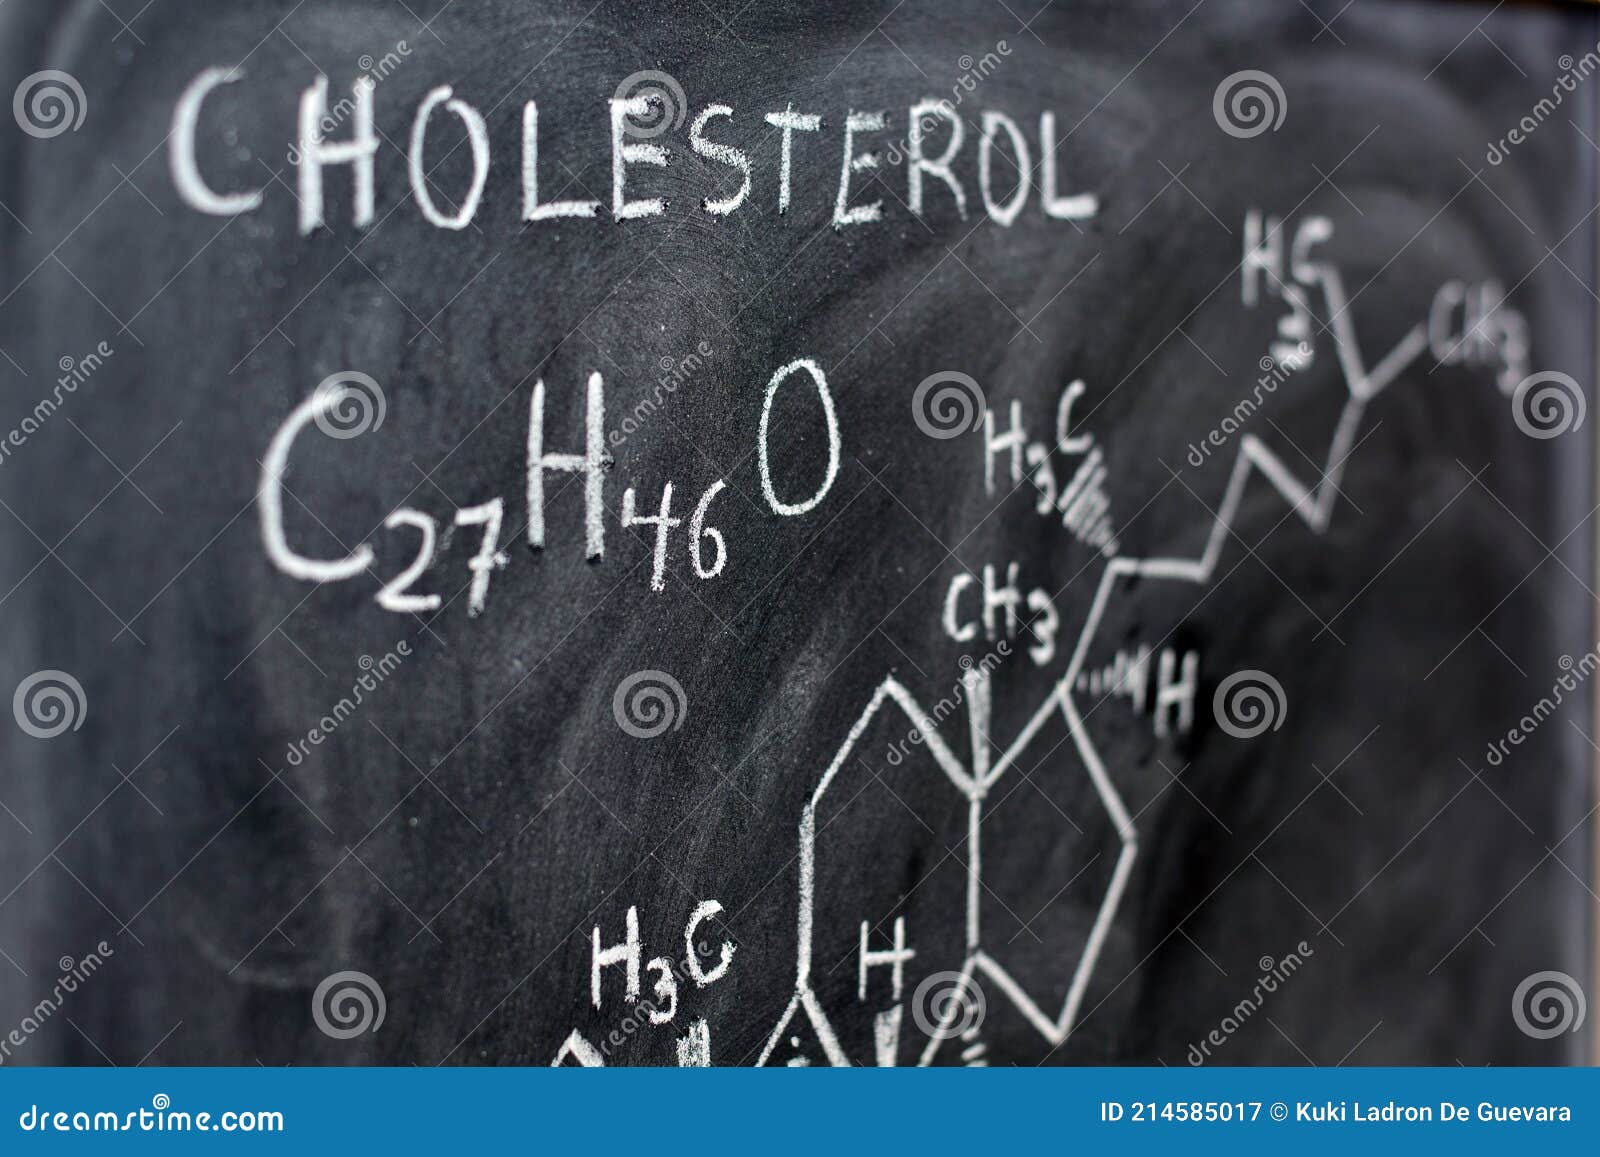 molecular and structural formula of cholesterol